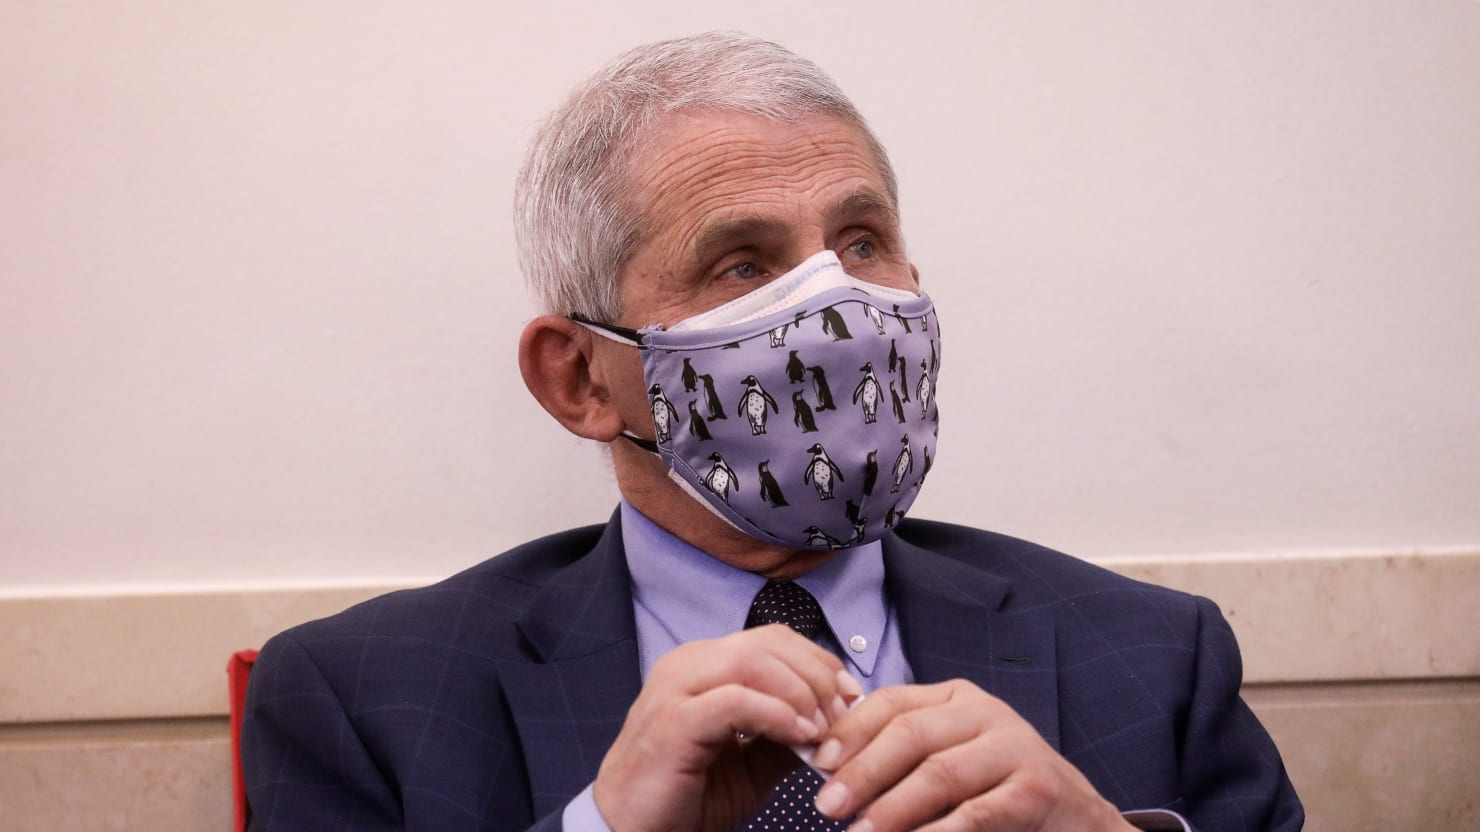 Fauci warns of ‘setback’ in the COVID fight after the brutal polar vortex